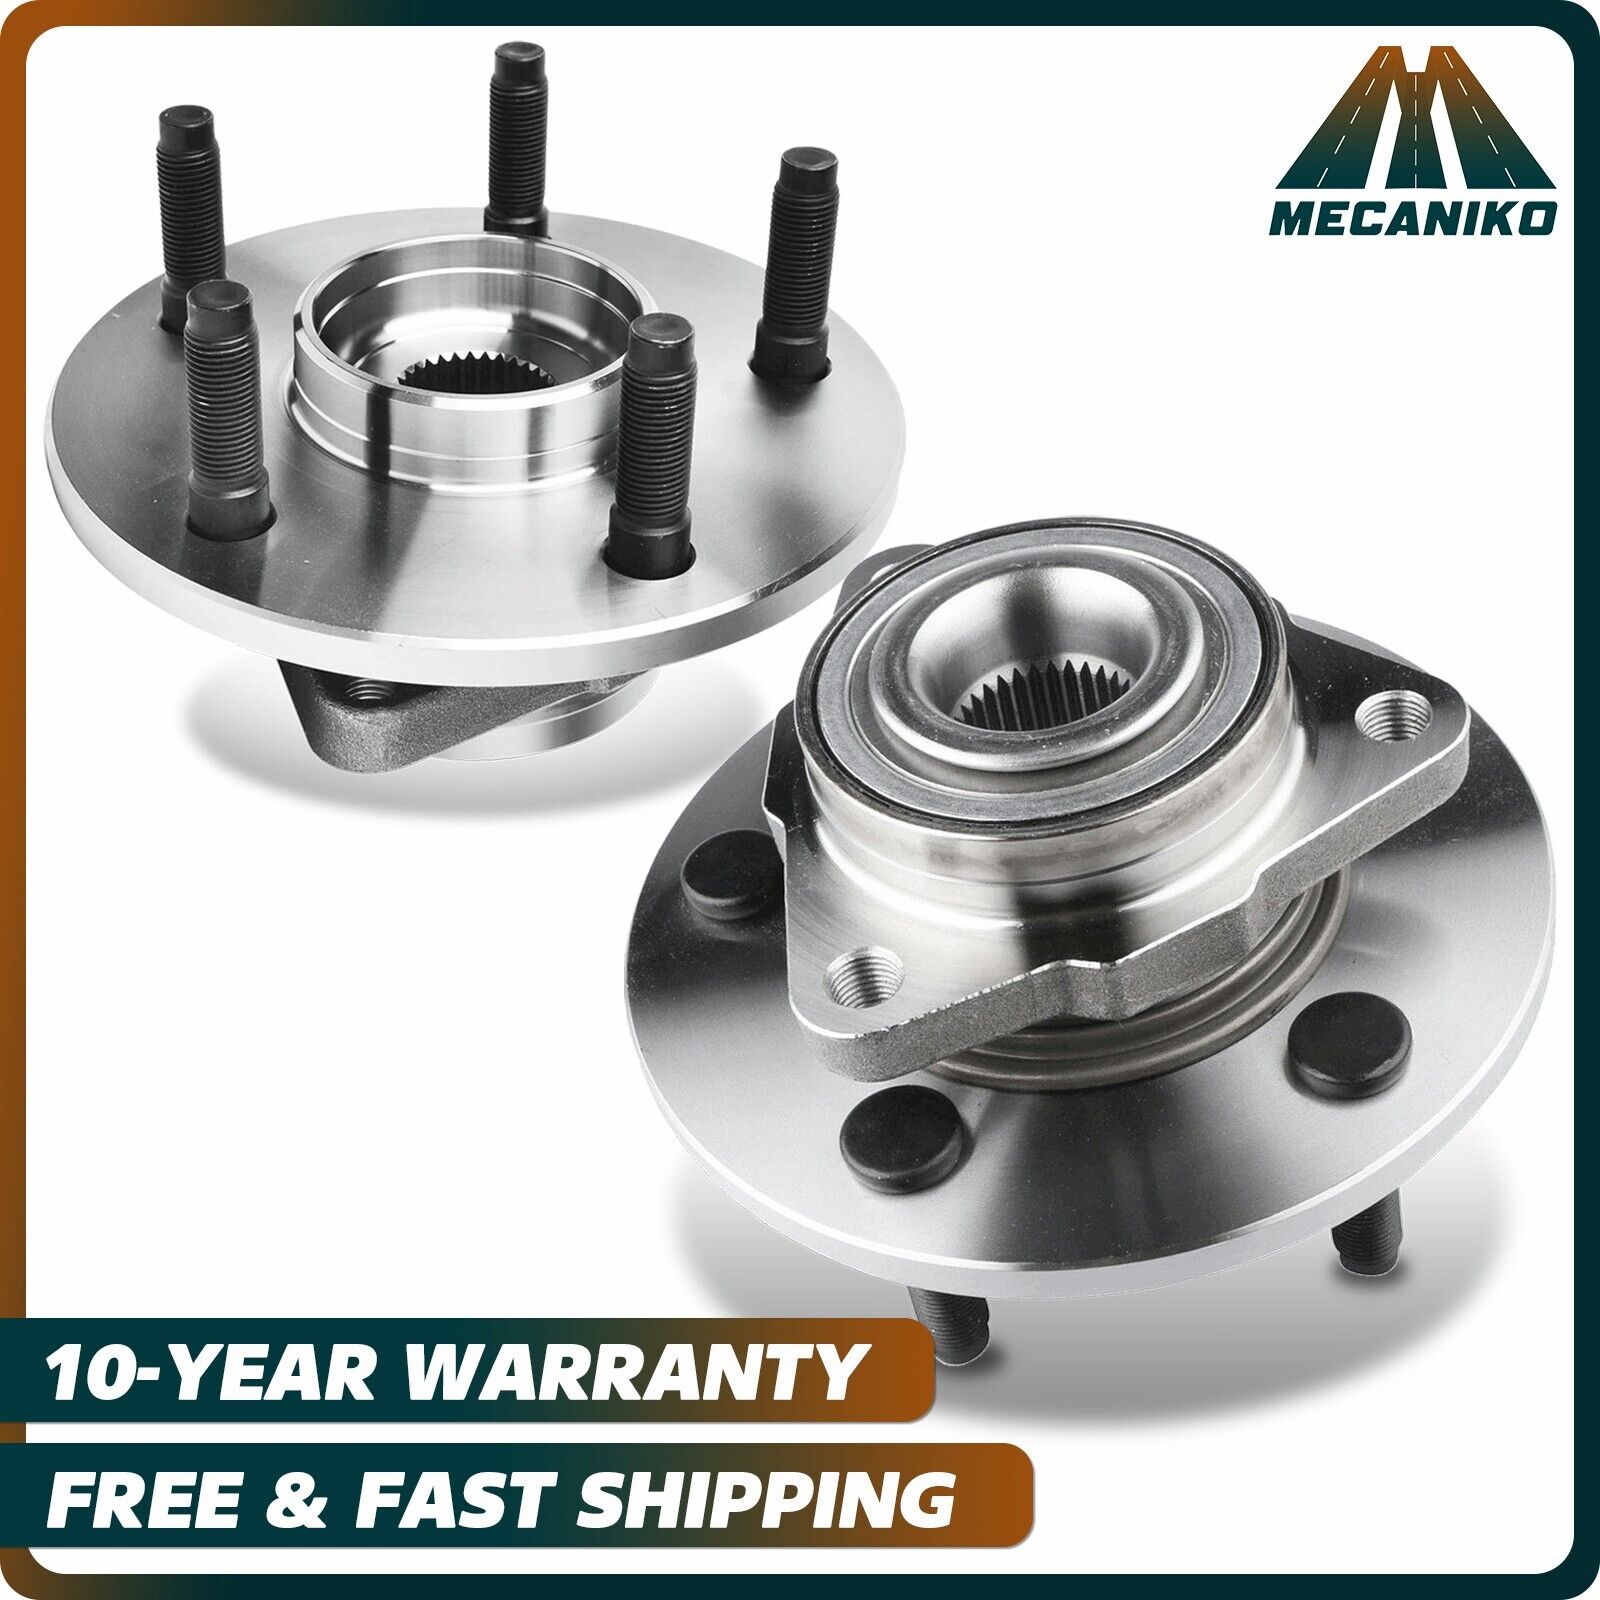 2x Front Wheel Bearing Hub for 2002-2008 Dodge Ram 1500 03 04 05 06 07 Assembly